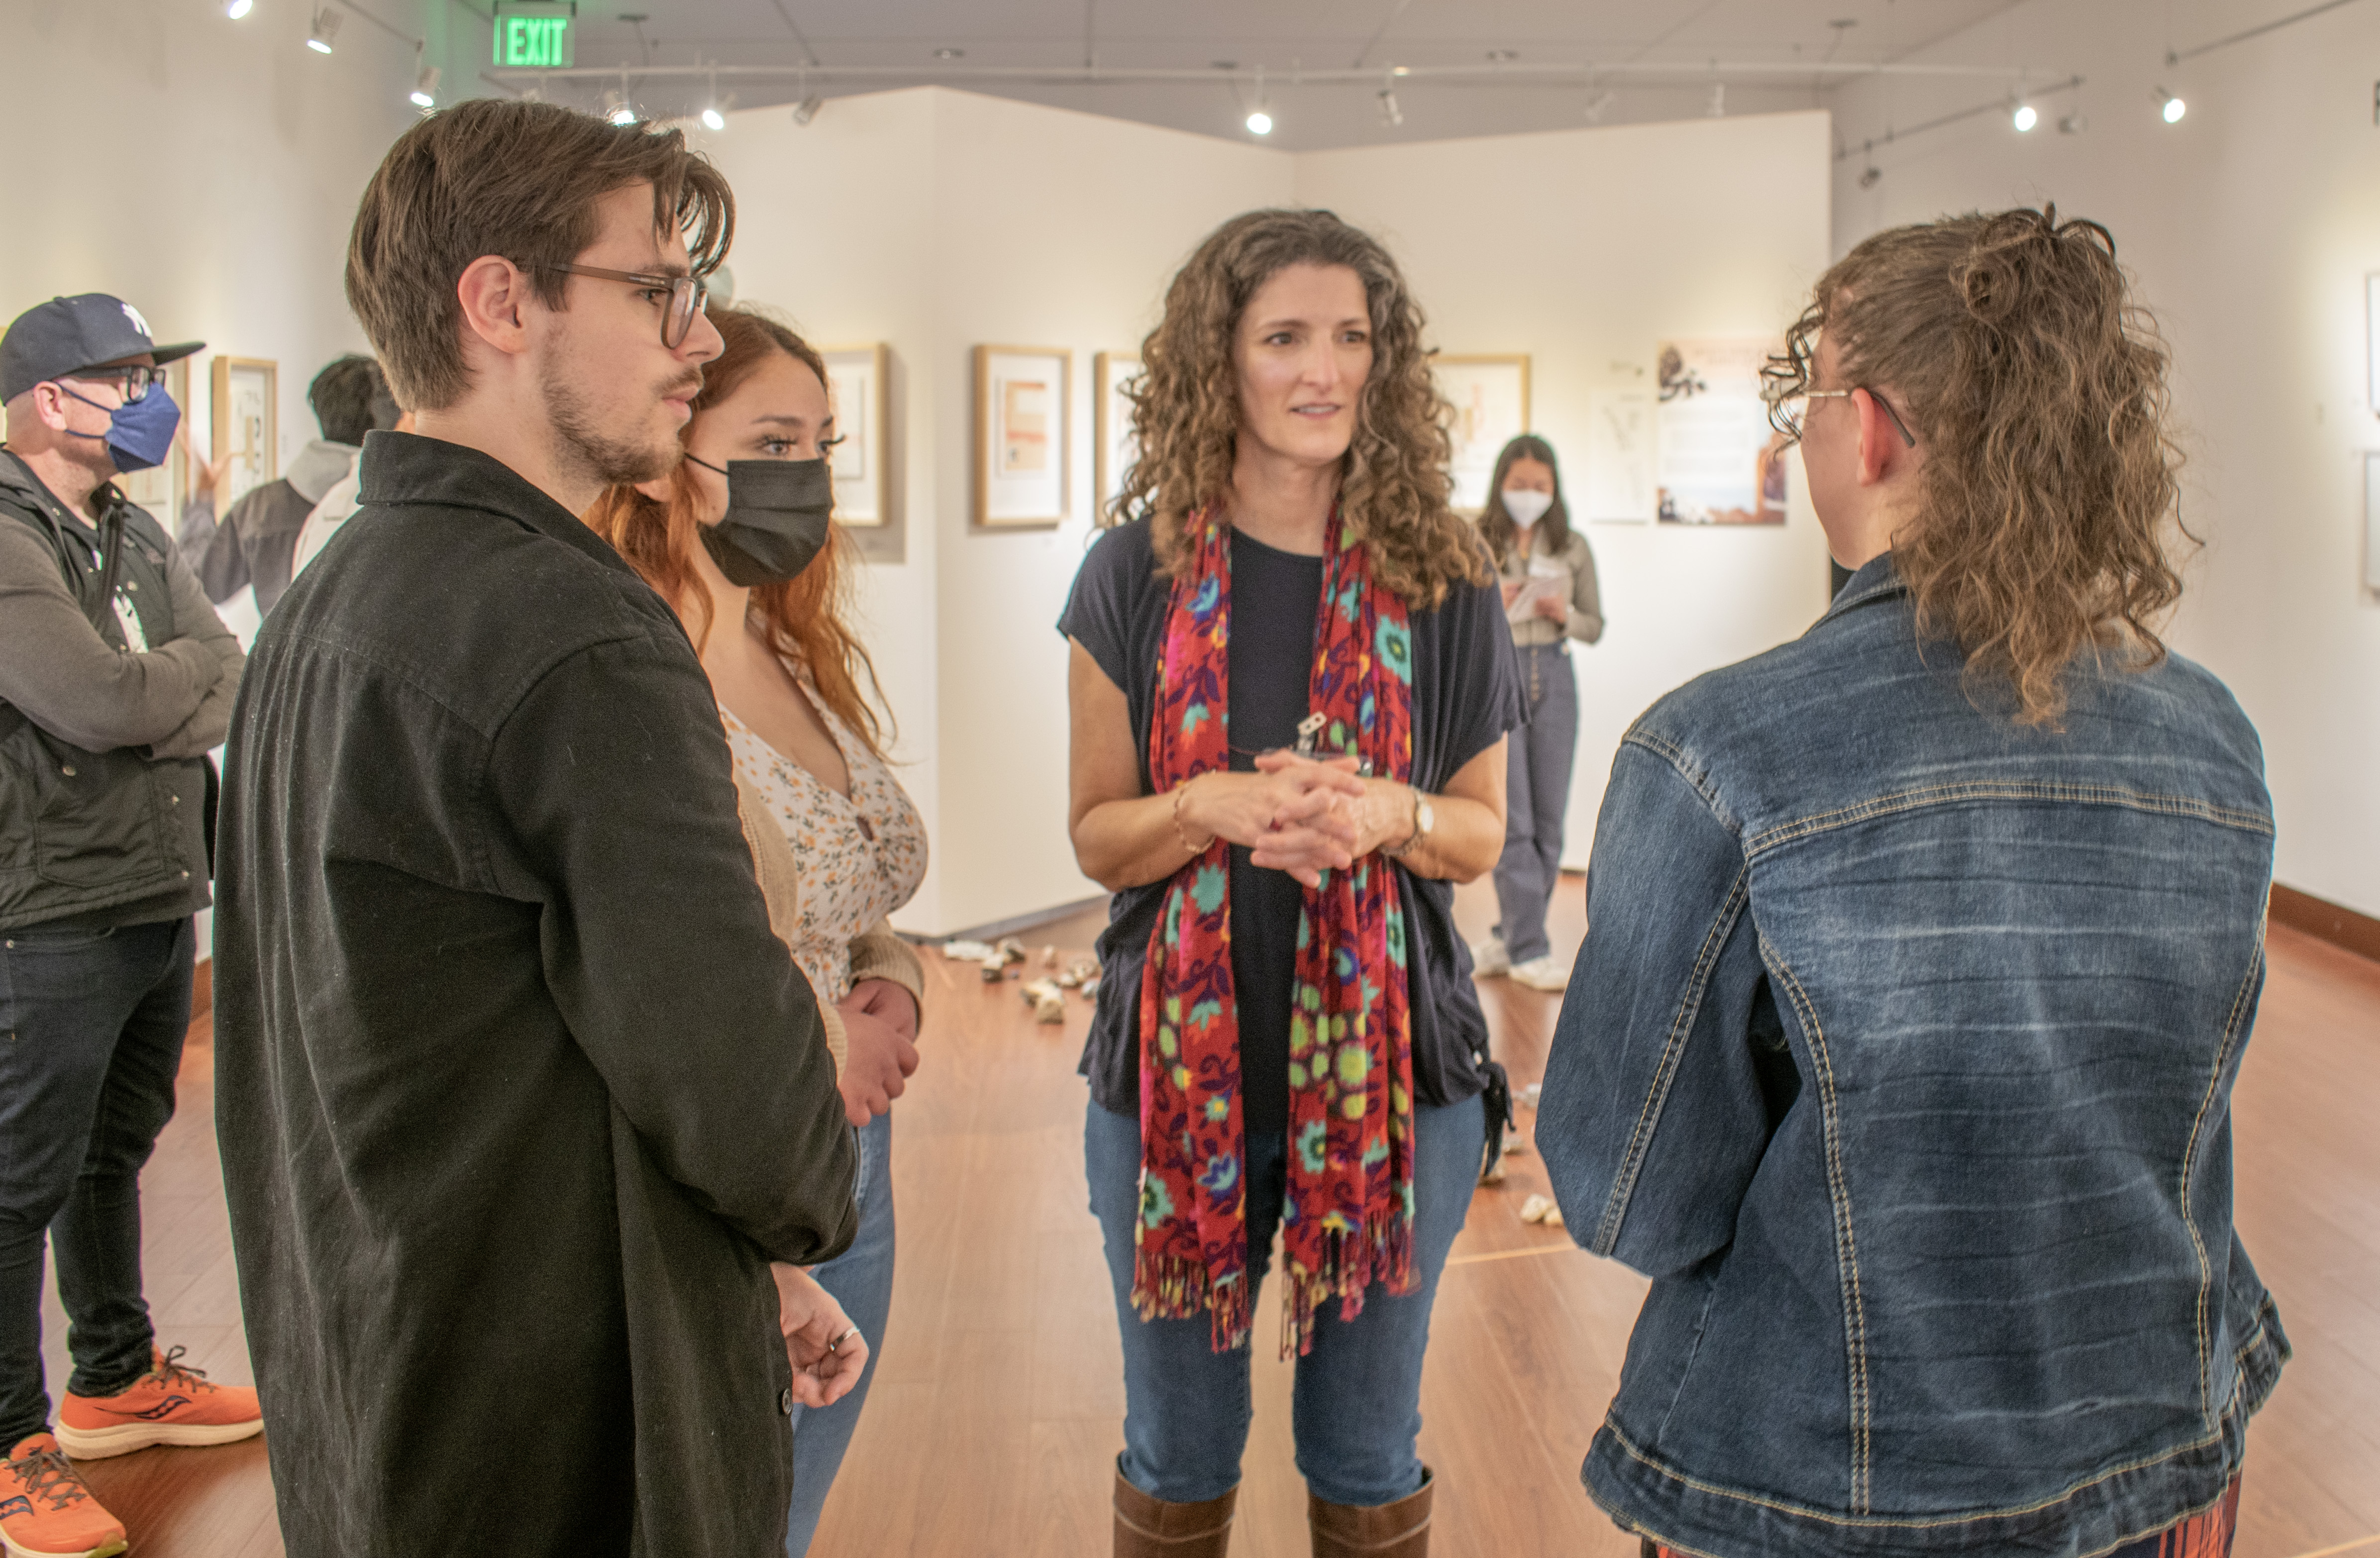 A photo of Sarah Meyer talking to two guests during her opening exhibition. She is in the middle of the two guests, and she is talking and making eye contact with the one on her left.